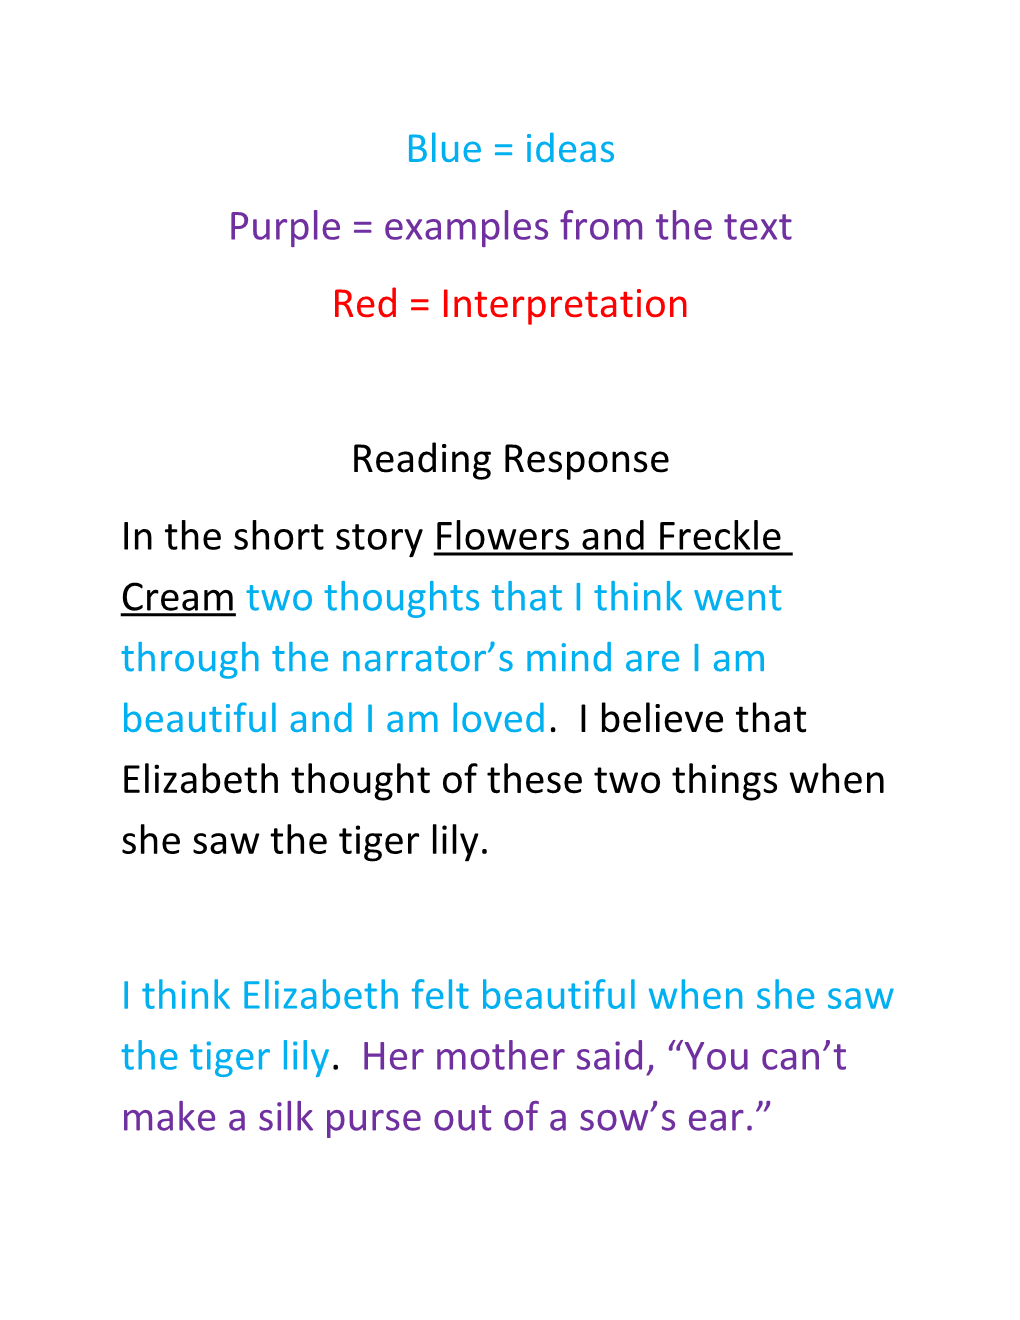 Purple = Examples from the Text